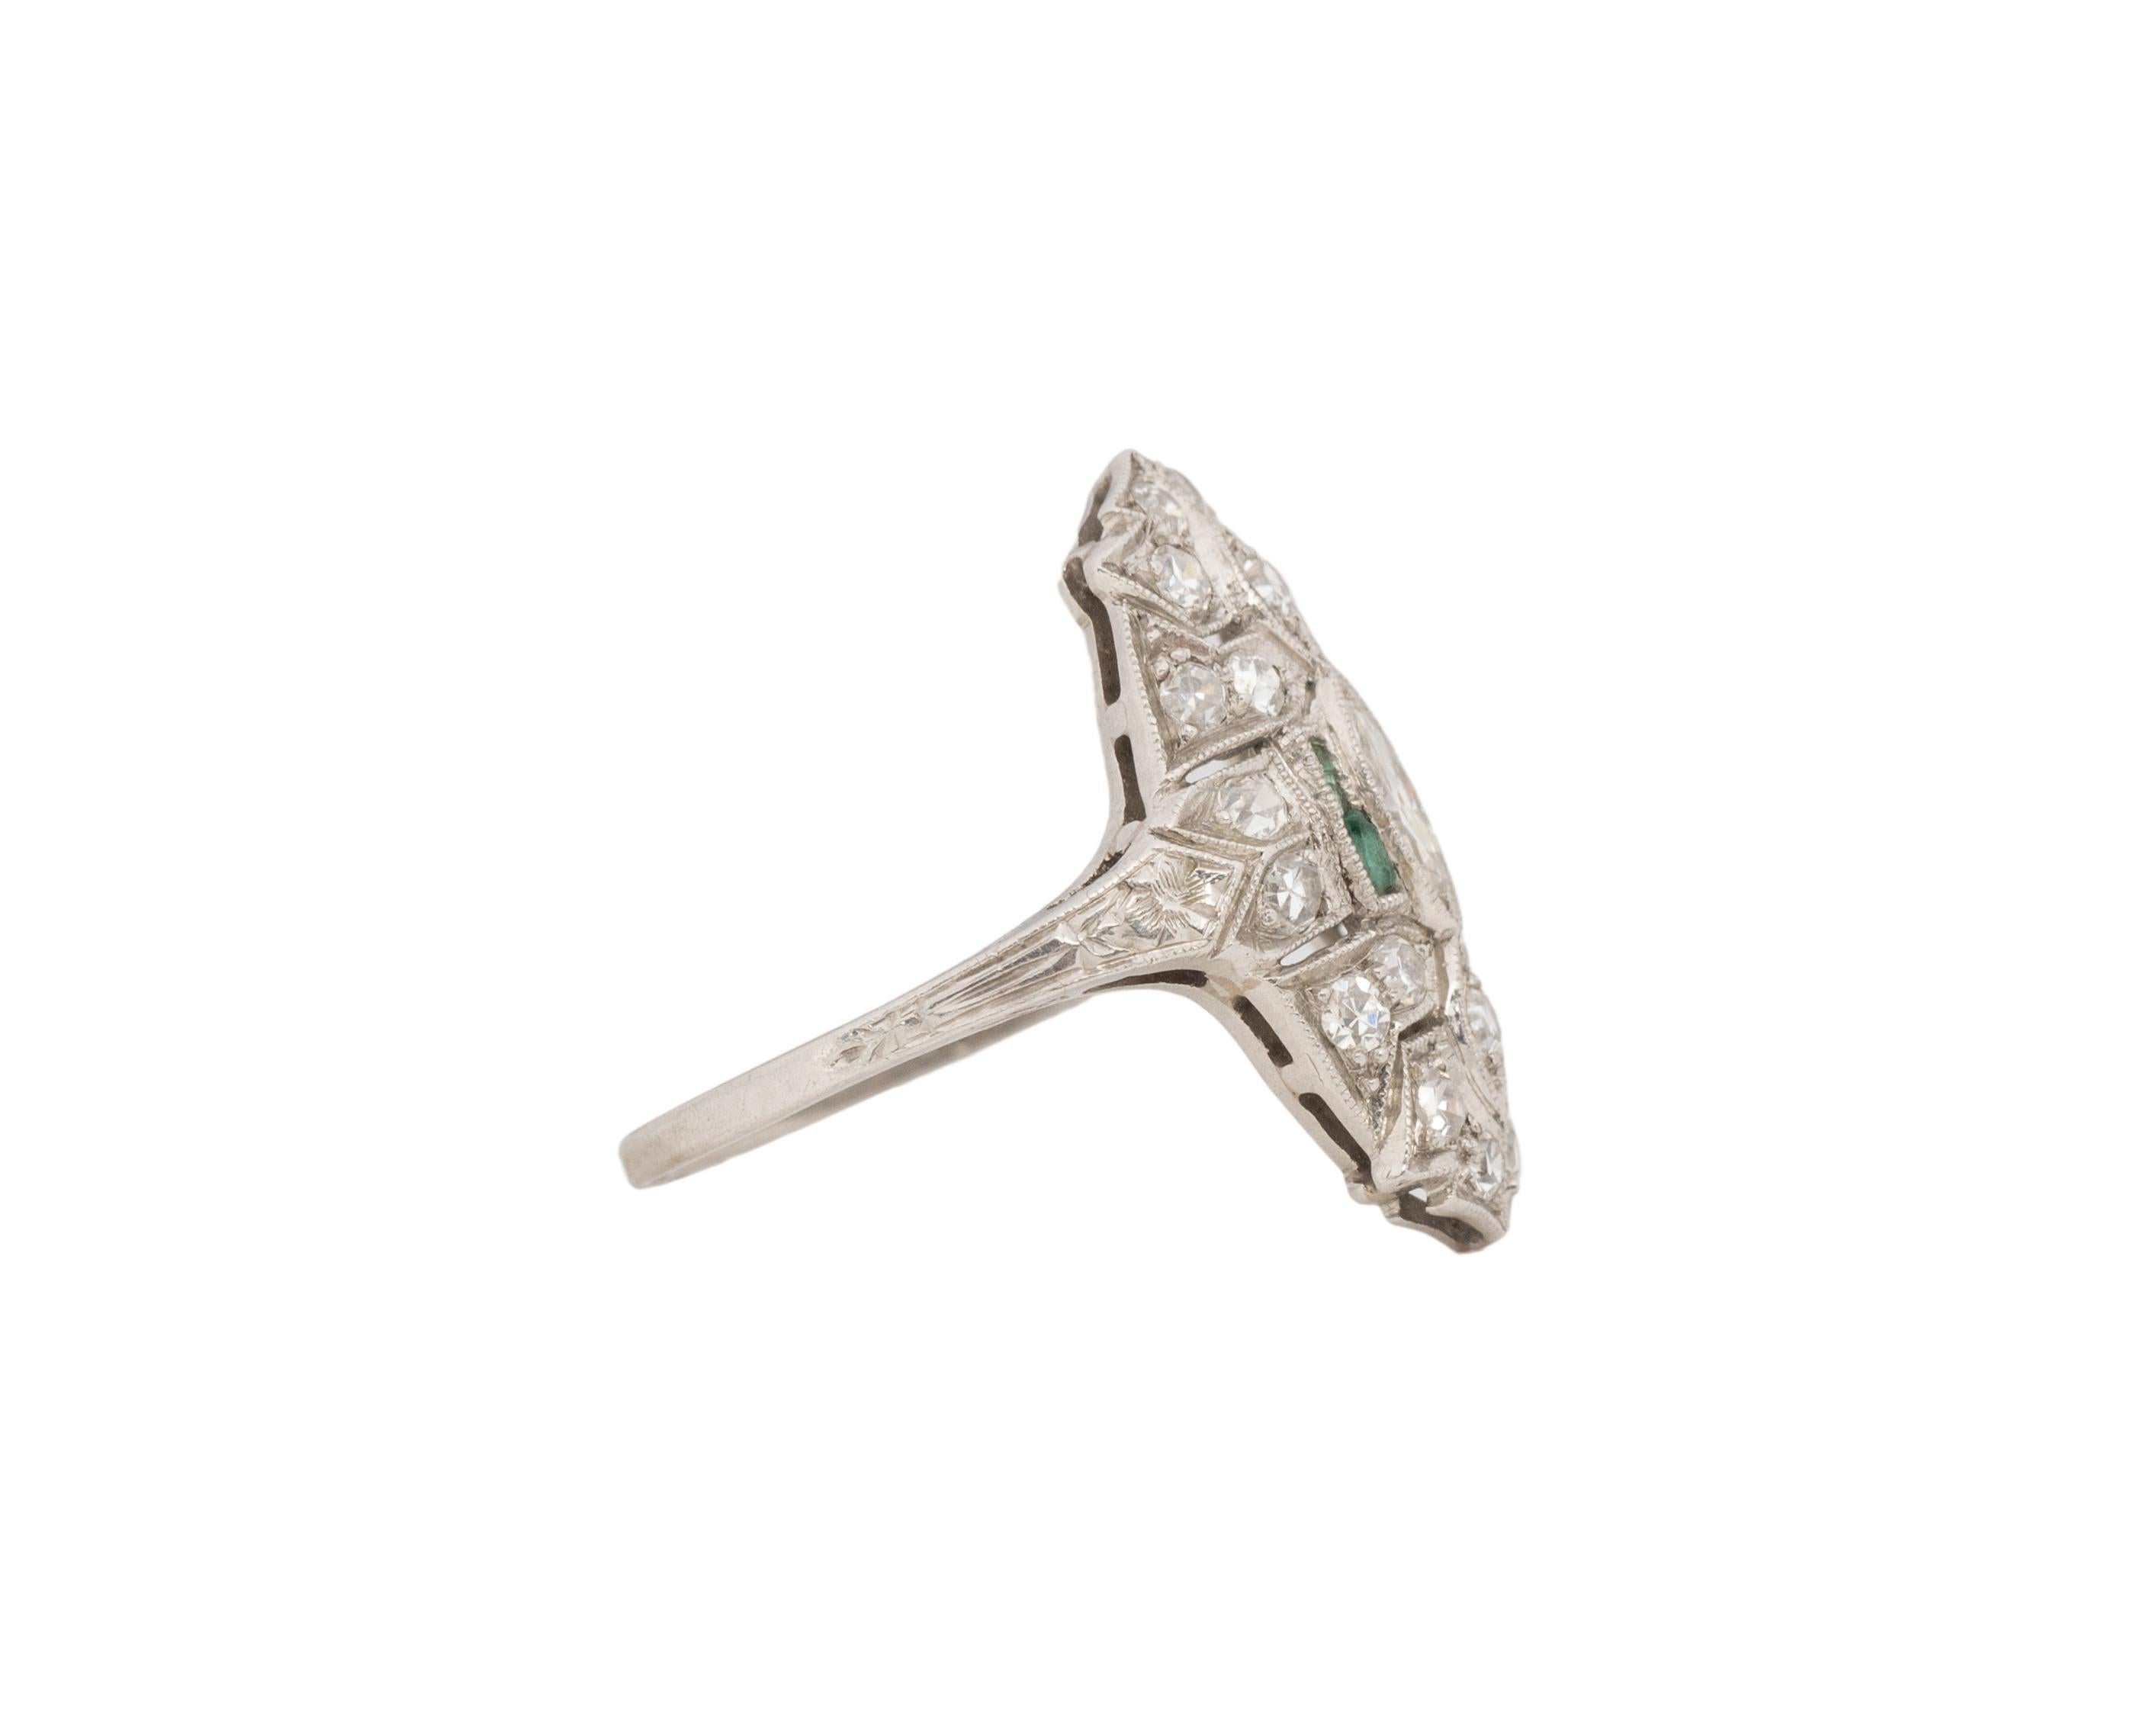 Ring Size: 6.25
Metal Type: Platinum [Hallmarked, and Tested]
Weight: 4.0grams

Diamond Details:
Weight: .80ct, total weight
Cut: Antique Marquise & Old European brilliant
Color: F-G
Clarity: VS

Emerald Details:
Weight: .20ct, total
Color: